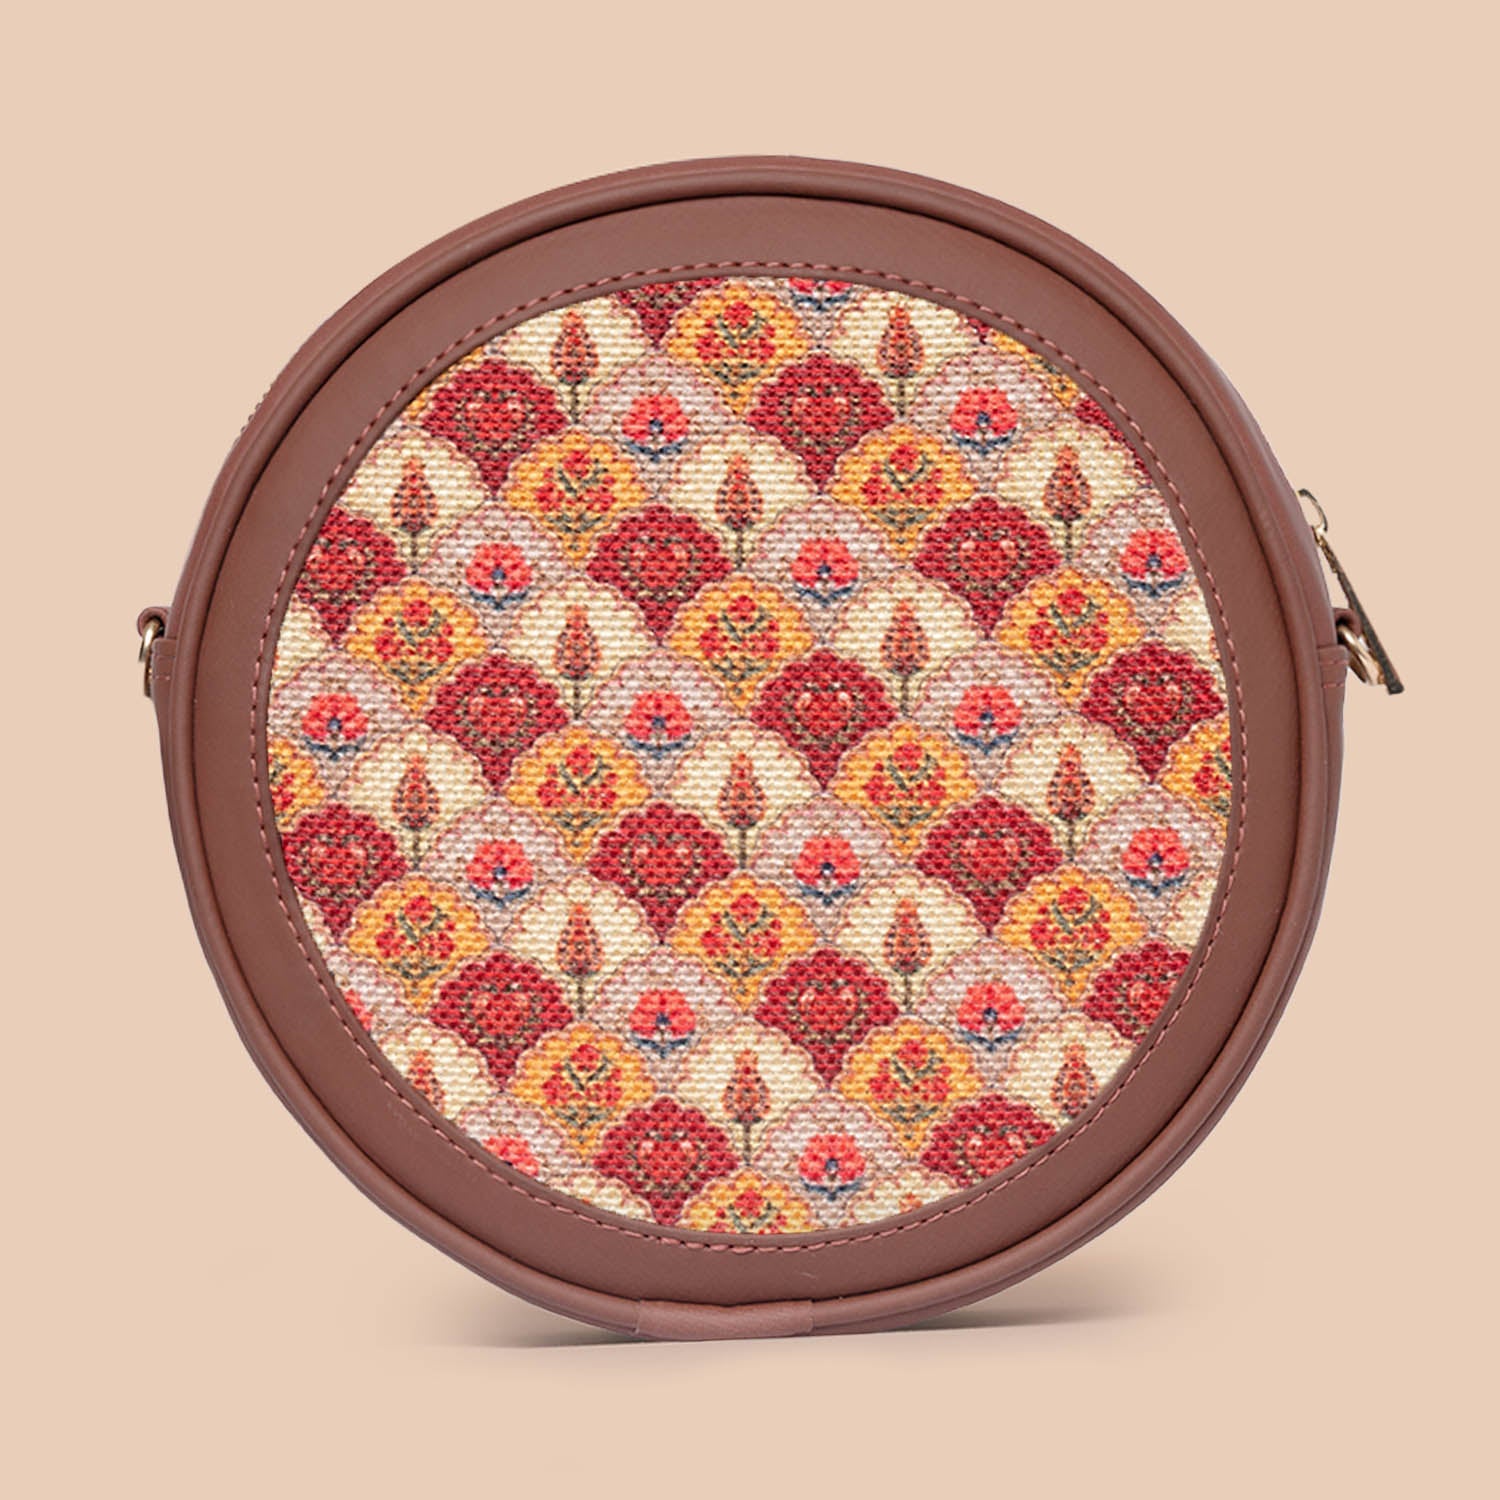 Patiala Florals Round Sling Bag